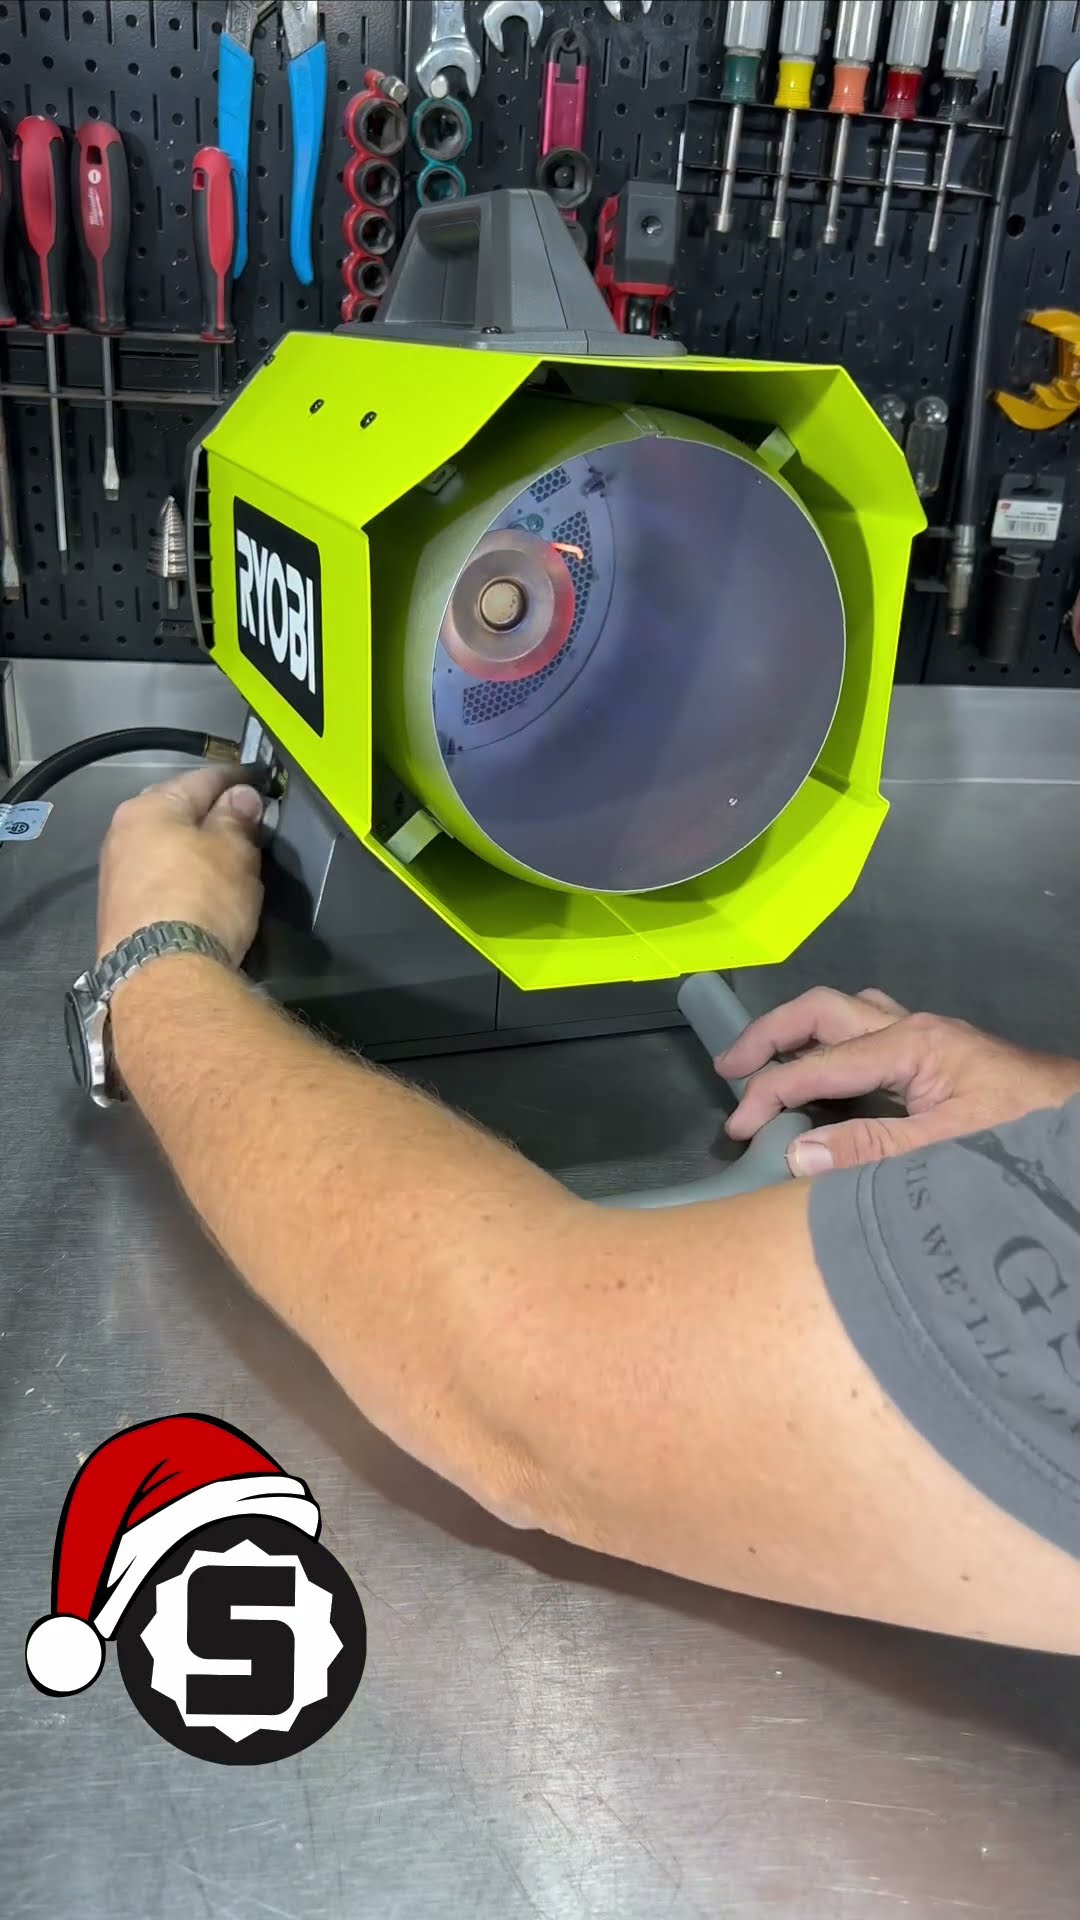 Ryobi Propane Heater - How To Properly Use It In The Winter 